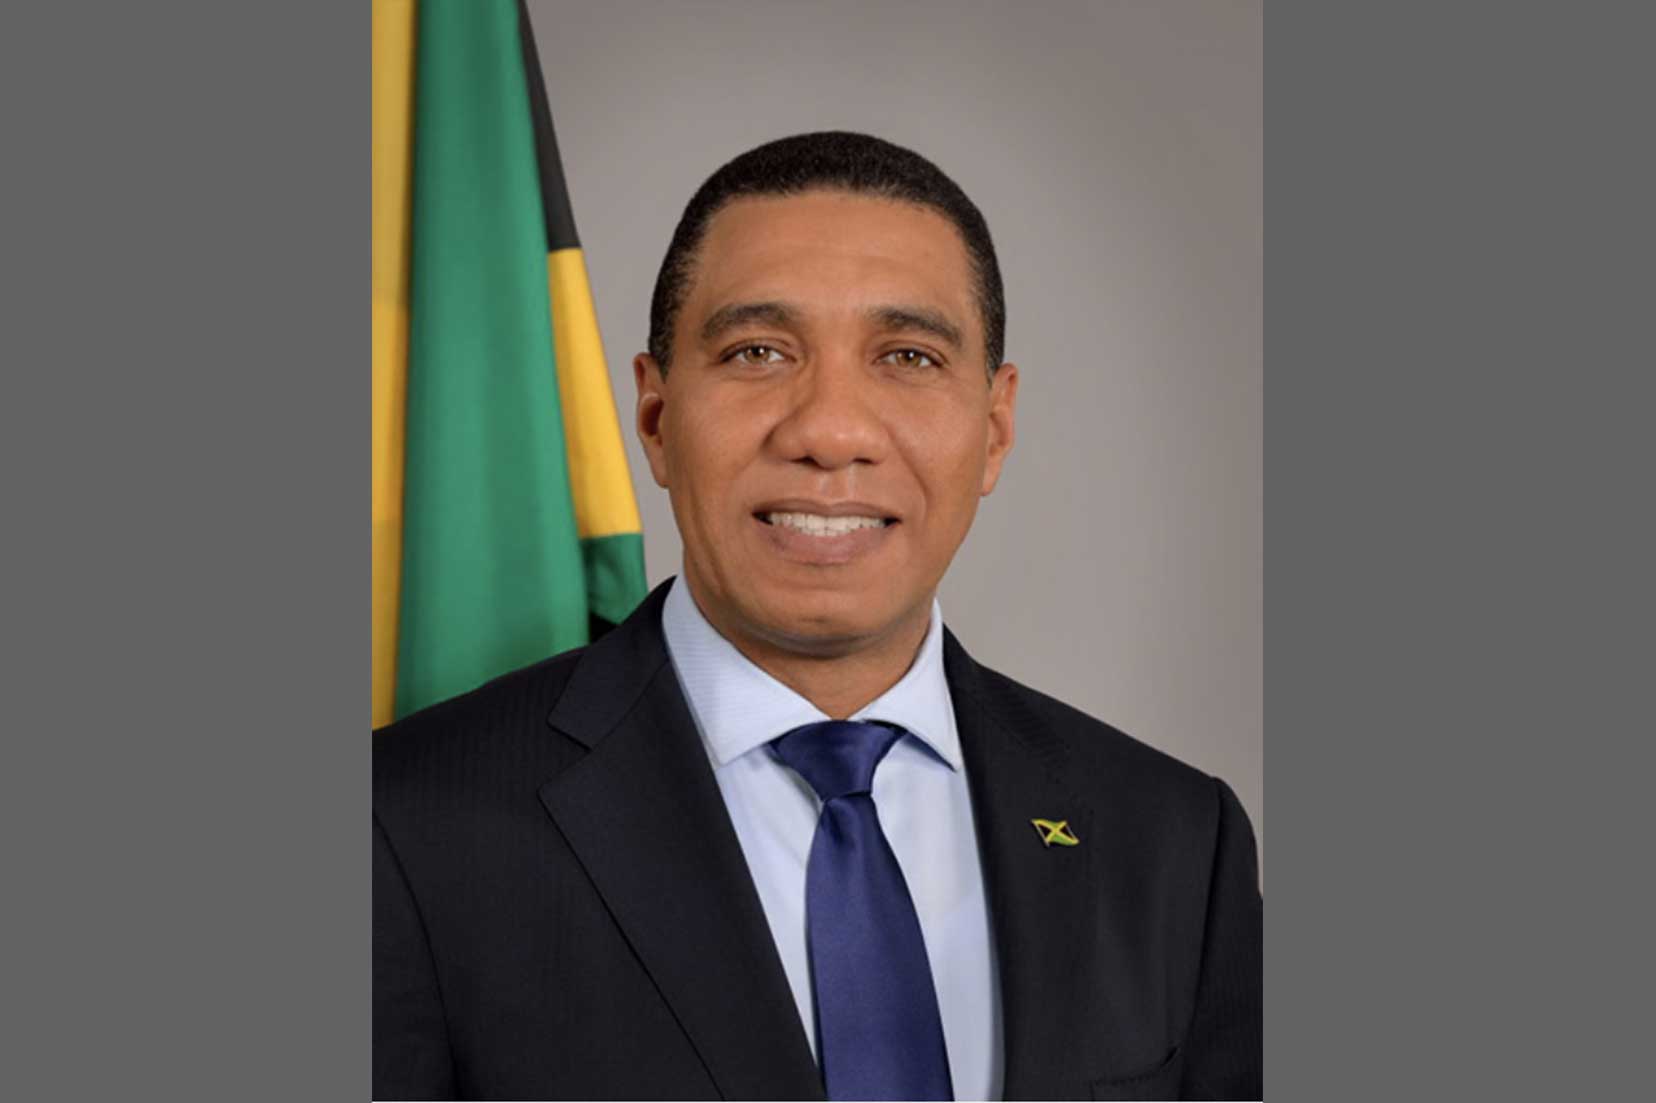 Jamaica Prime Minister to give keynote at Graduate Commencement